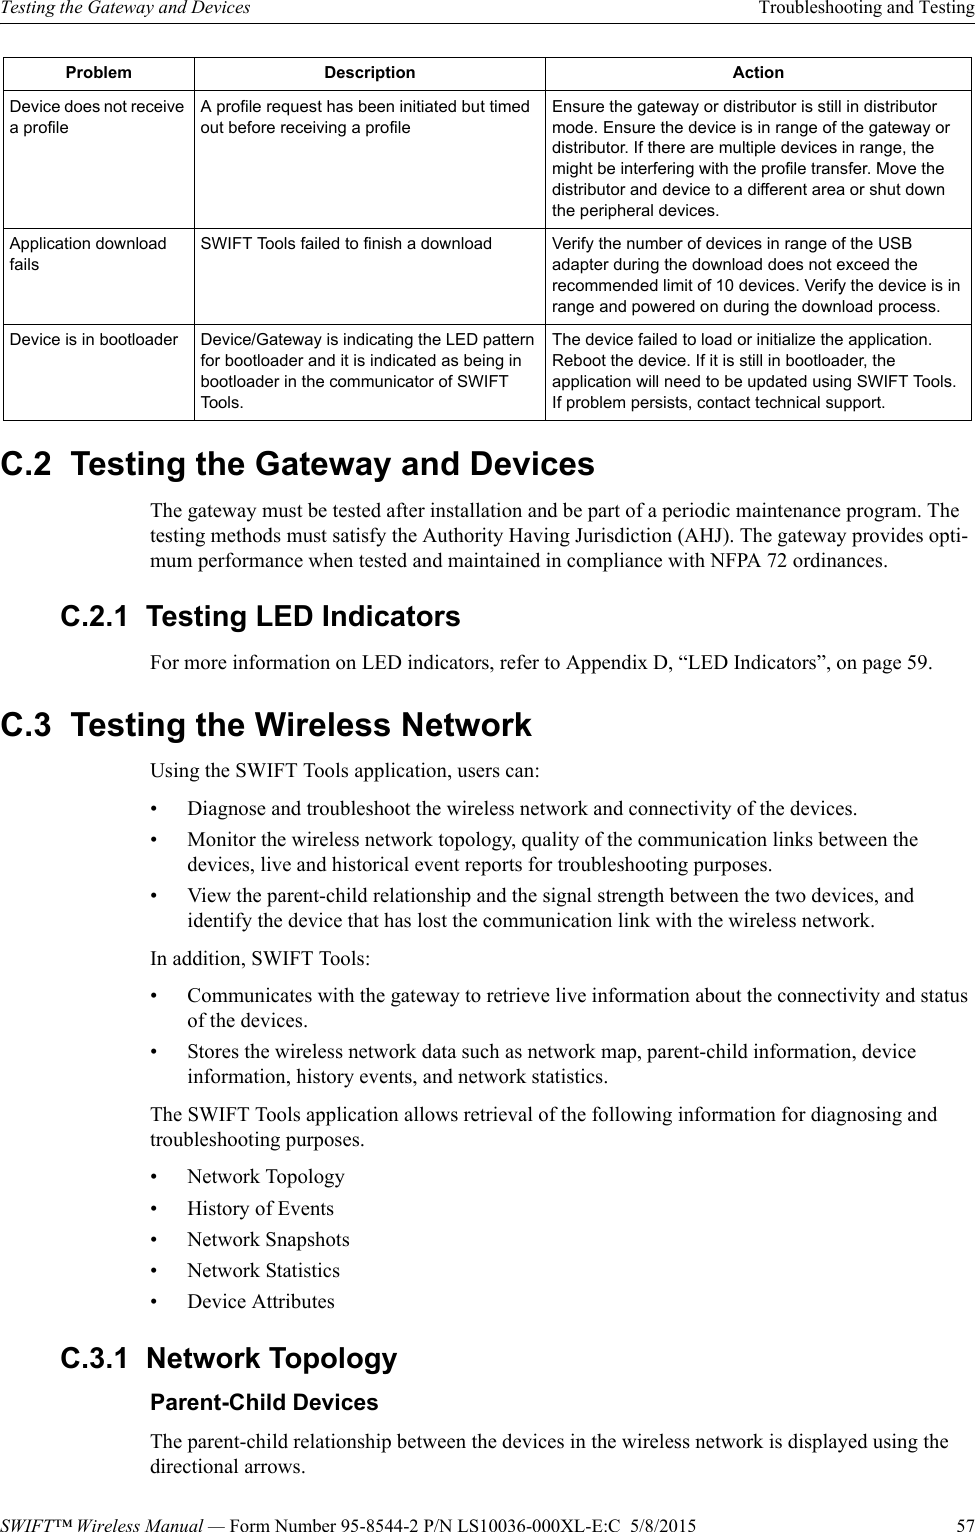 SWIFT™ Wireless Manual — Form Number 95-8544-2 P/N LS10036-000XL-E:C  5/8/2015  57Testing the Gateway and Devices Troubleshooting and TestingC.2  Testing the Gateway and DevicesThe gateway must be tested after installation and be part of a periodic maintenance program. The testing methods must satisfy the Authority Having Jurisdiction (AHJ). The gateway provides opti-mum performance when tested and maintained in compliance with NFPA 72 ordinances.C.2.1  Testing LED IndicatorsFor more information on LED indicators, refer to Appendix D, “LED Indicators”, on page 59.C.3  Testing the Wireless NetworkUsing the SWIFT Tools application, users can:• Diagnose and troubleshoot the wireless network and connectivity of the devices. • Monitor the wireless network topology, quality of the communication links between the devices, live and historical event reports for troubleshooting purposes. • View the parent-child relationship and the signal strength between the two devices, and identify the device that has lost the communication link with the wireless network.In addition, SWIFT Tools:• Communicates with the gateway to retrieve live information about the connectivity and status of the devices.• Stores the wireless network data such as network map, parent-child information, device information, history events, and network statistics.The SWIFT Tools application allows retrieval of the following information for diagnosing and troubleshooting purposes.• Network Topology • History of Events• Network Snapshots• Network Statistics• Device AttributesC.3.1  Network TopologyParent-Child DevicesThe parent-child relationship between the devices in the wireless network is displayed using the directional arrows.Device does not receive a profileA profile request has been initiated but timed out before receiving a profileEnsure the gateway or distributor is still in distributor mode. Ensure the device is in range of the gateway or distributor. If there are multiple devices in range, the might be interfering with the profile transfer. Move the distributor and device to a different area or shut down the peripheral devices.Application download failsSWIFT Tools failed to finish a download Verify the number of devices in range of the USB adapter during the download does not exceed the recommended limit of 10 devices. Verify the device is in range and powered on during the download process.Device is in bootloader Device/Gateway is indicating the LED pattern for bootloader and it is indicated as being in bootloader in the communicator of SWIFT Tools.The device failed to load or initialize the application. Reboot the device. If it is still in bootloader, the application will need to be updated using SWIFT Tools. If problem persists, contact technical support.Problem Description Action